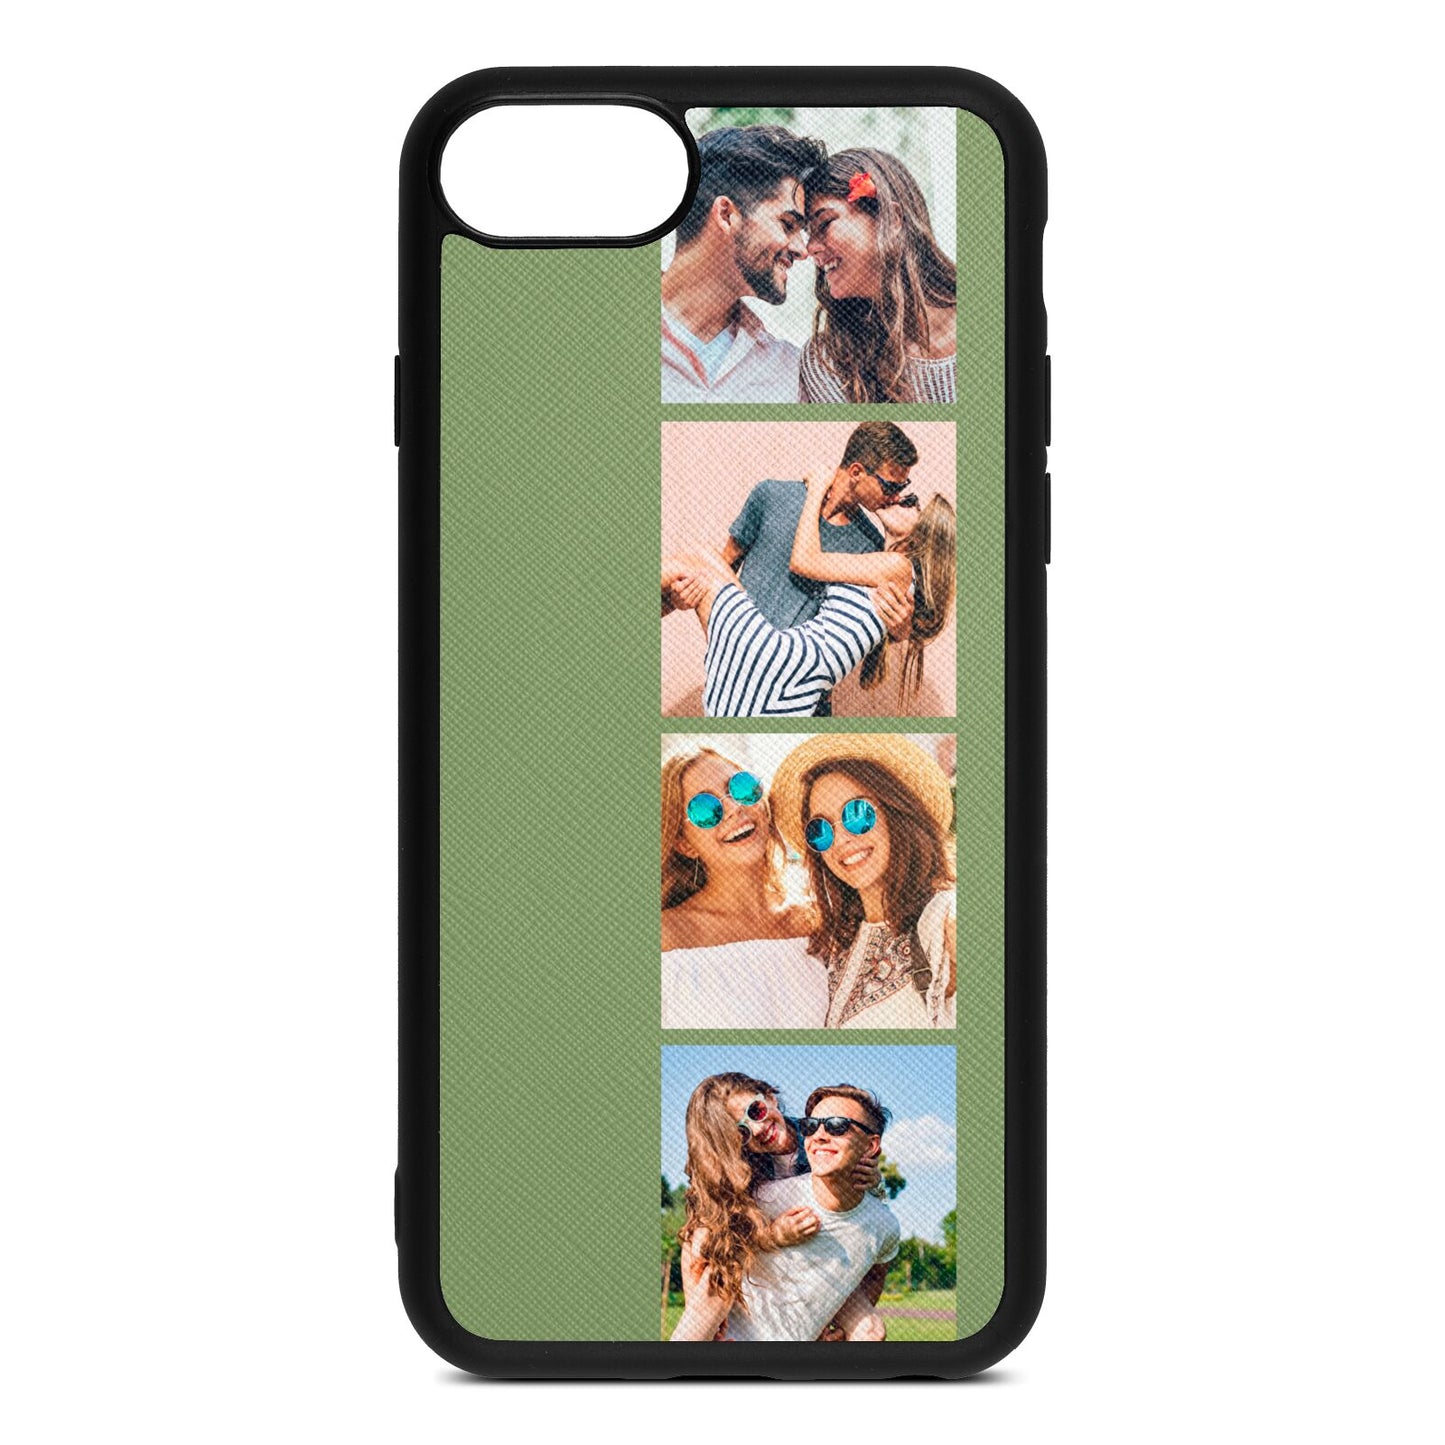 Photo Strip Montage Upload Lime Saffiano Leather iPhone 8 Case